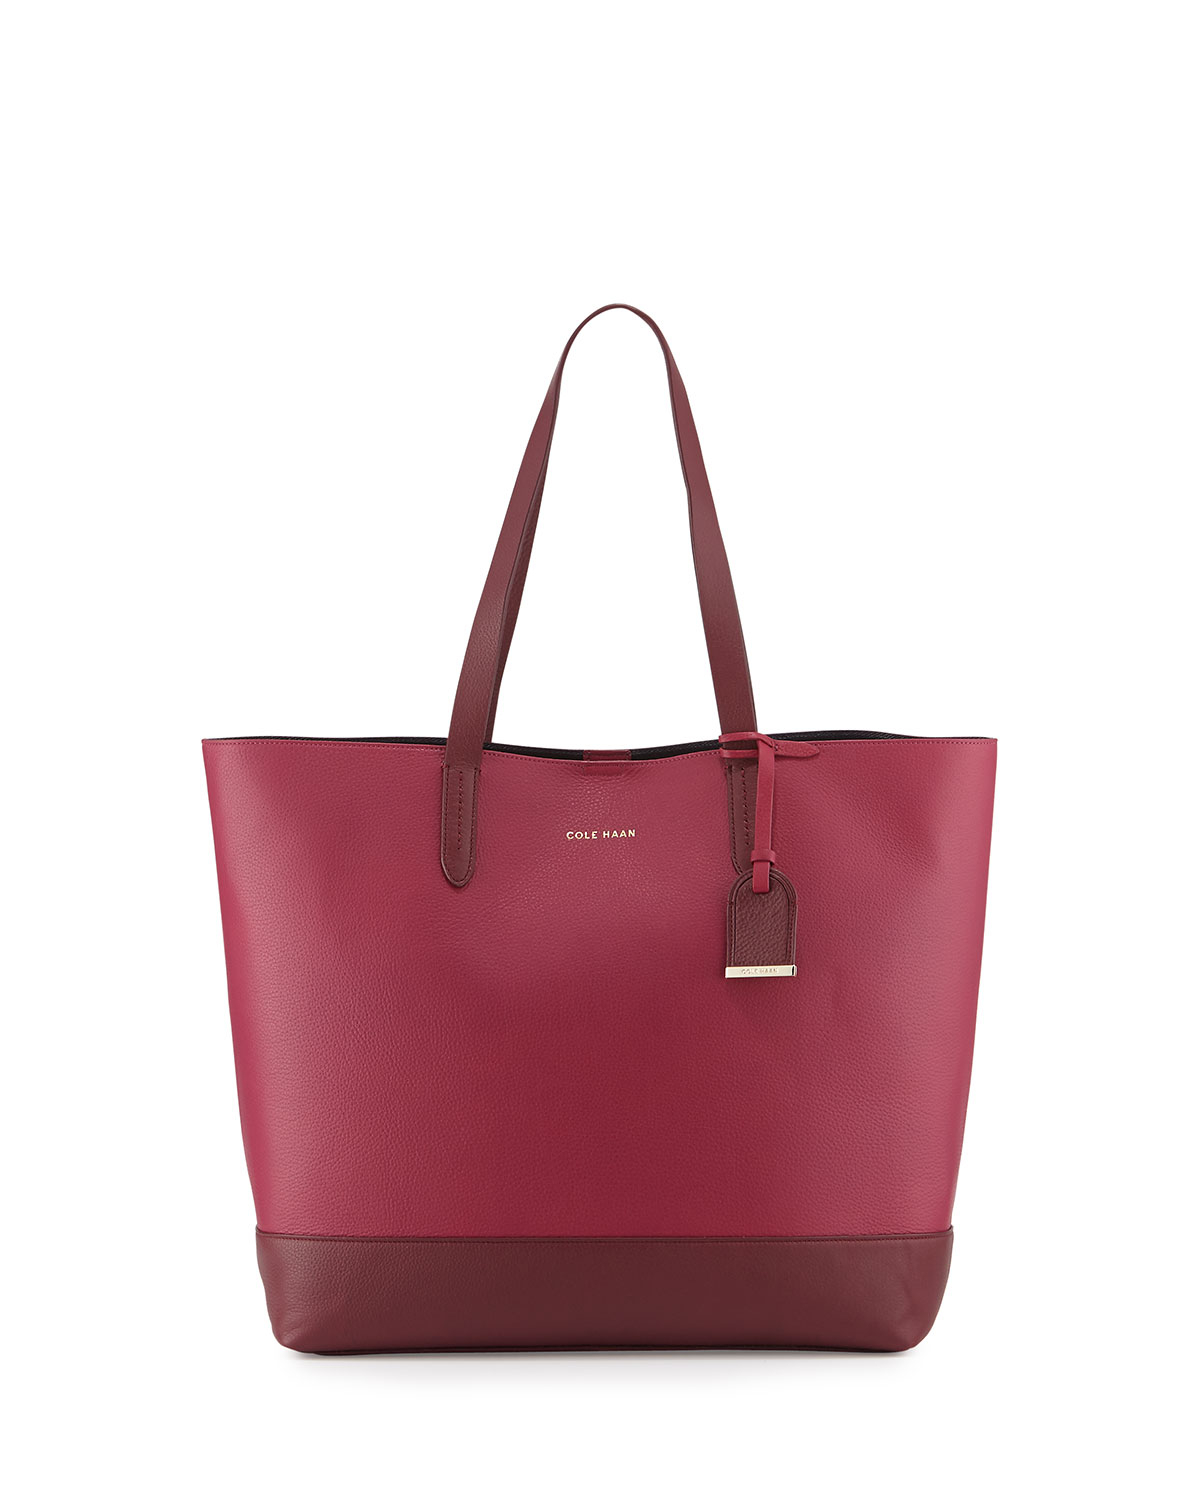 Lyst - Cole Haan Large Two-tone Leather Tote Bag in Red